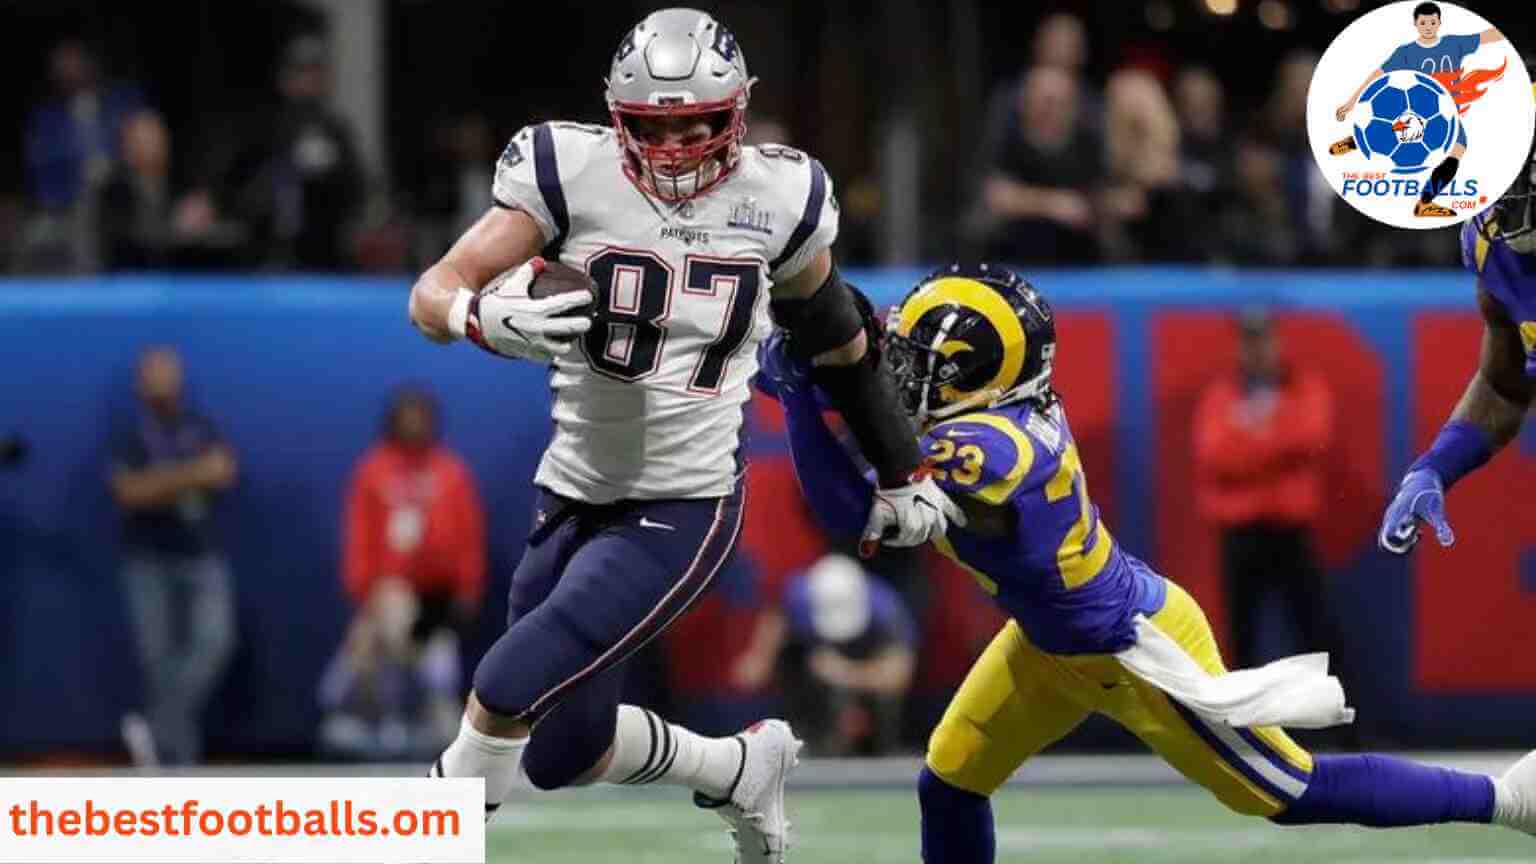 Rob Gronkowski: A Dominant Force in the World of Football